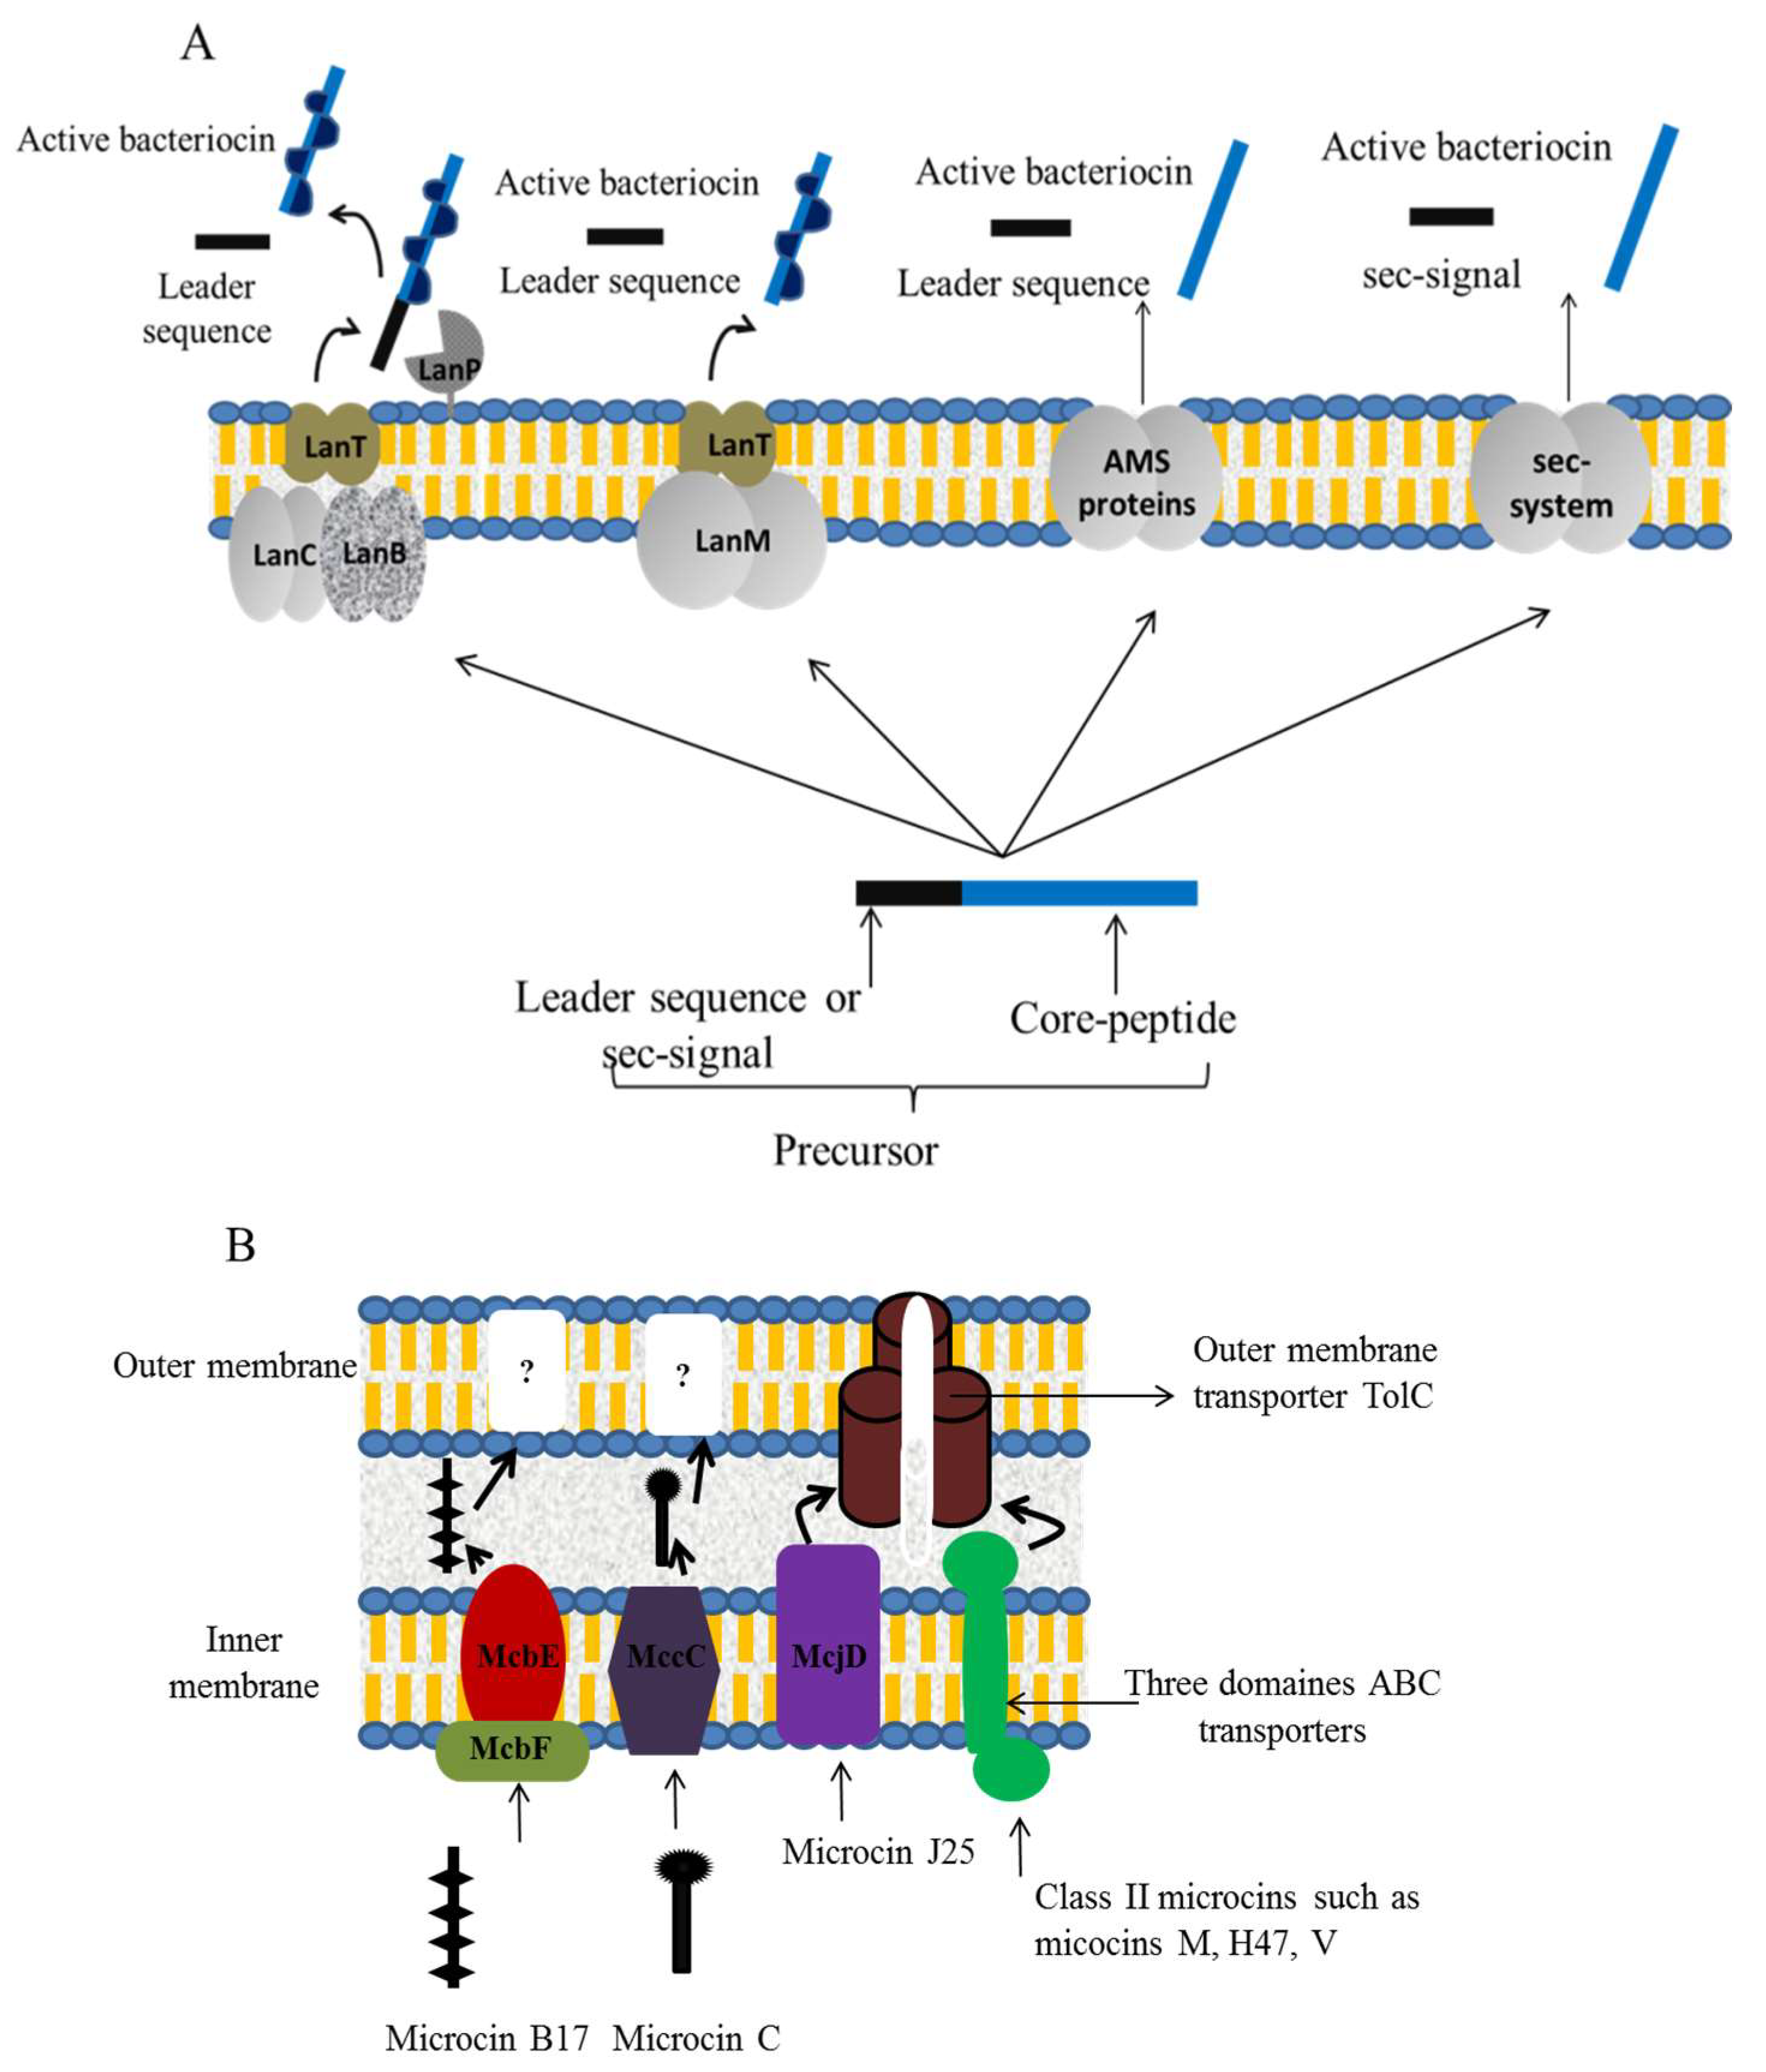 Microorganisms Free Full Text Bacteriocins Antimicrobial Peptides From Bacterial Origin Overview Of Their Biology And Their Impact Against Multidrug Resistant Bacteria Html